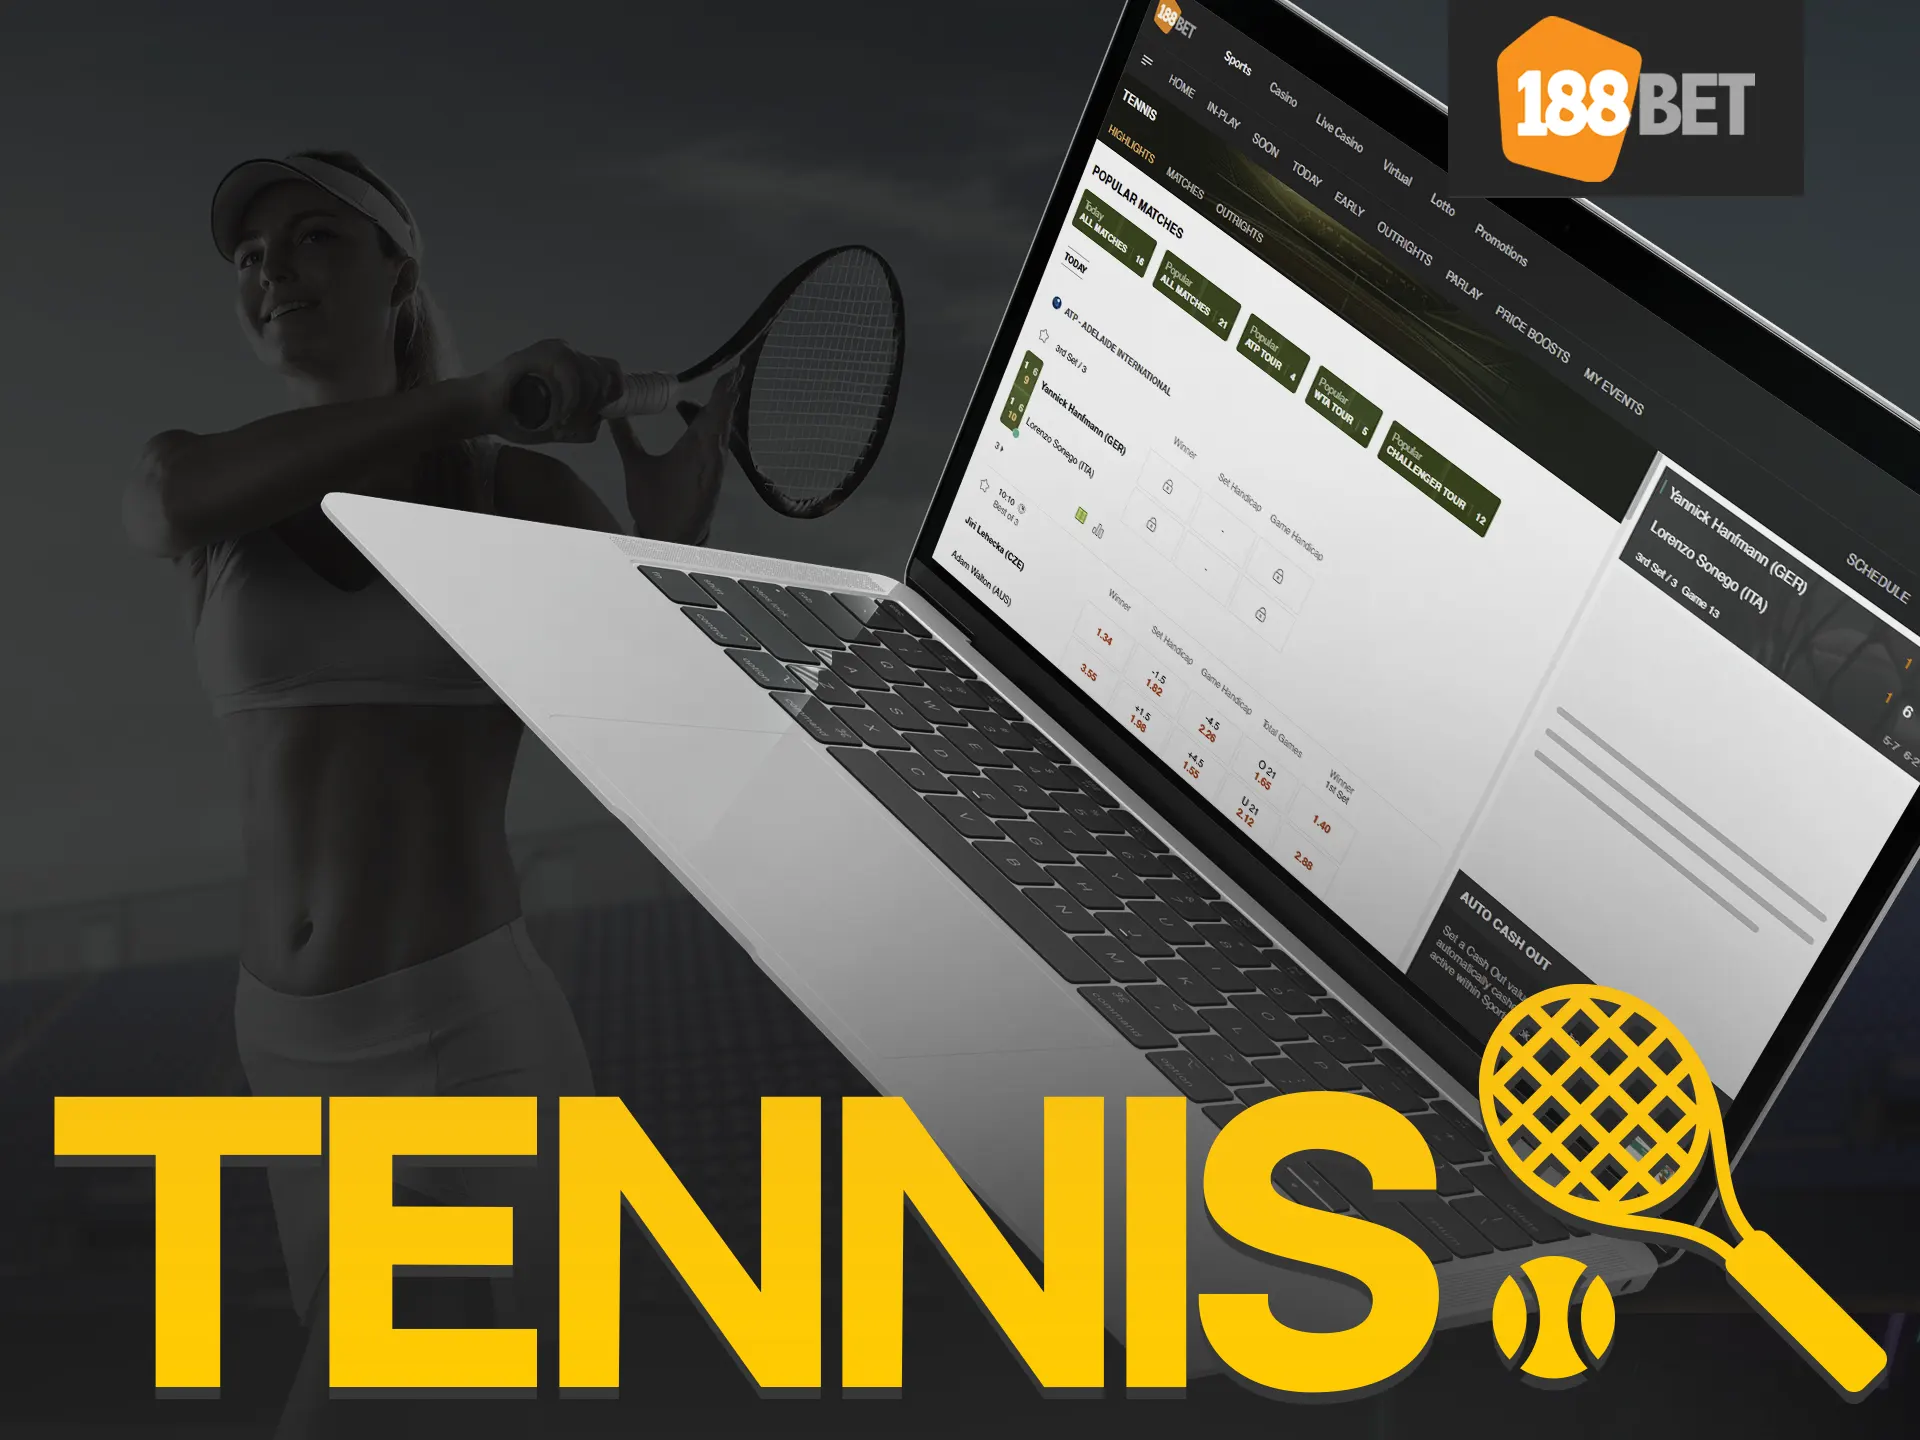 Place bets on tennis at 188bet.